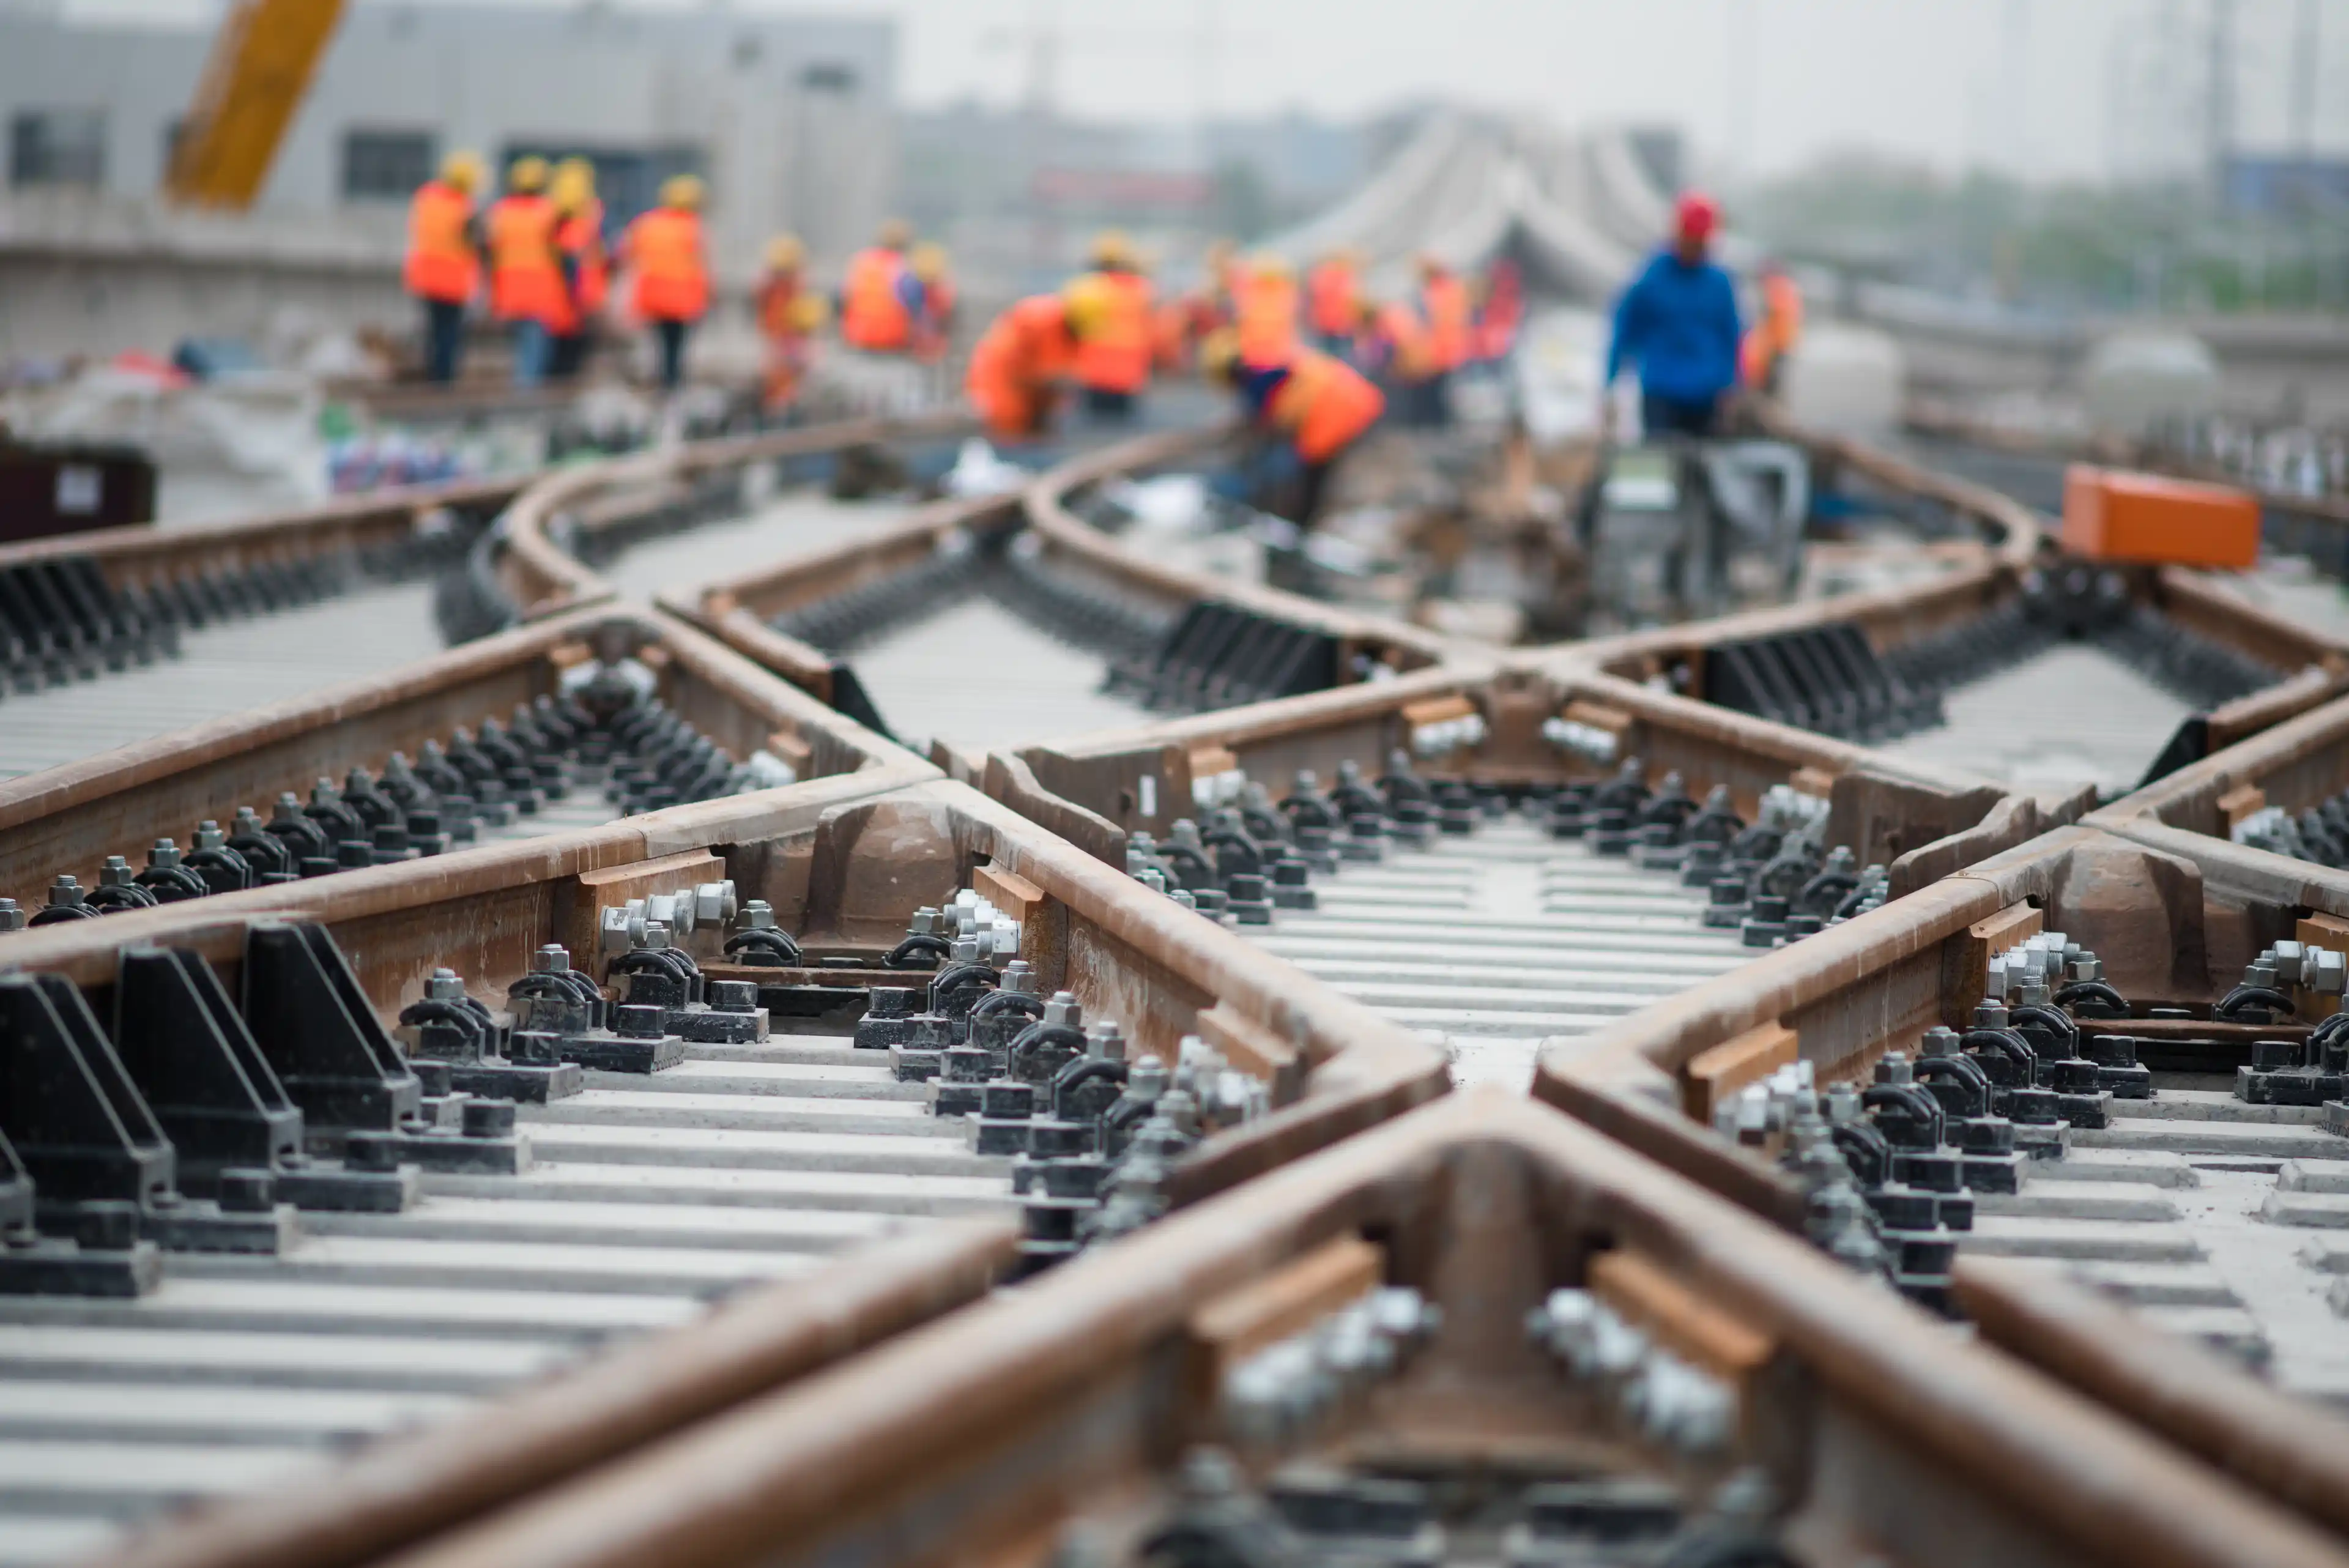 Rail workers working on the tracks together